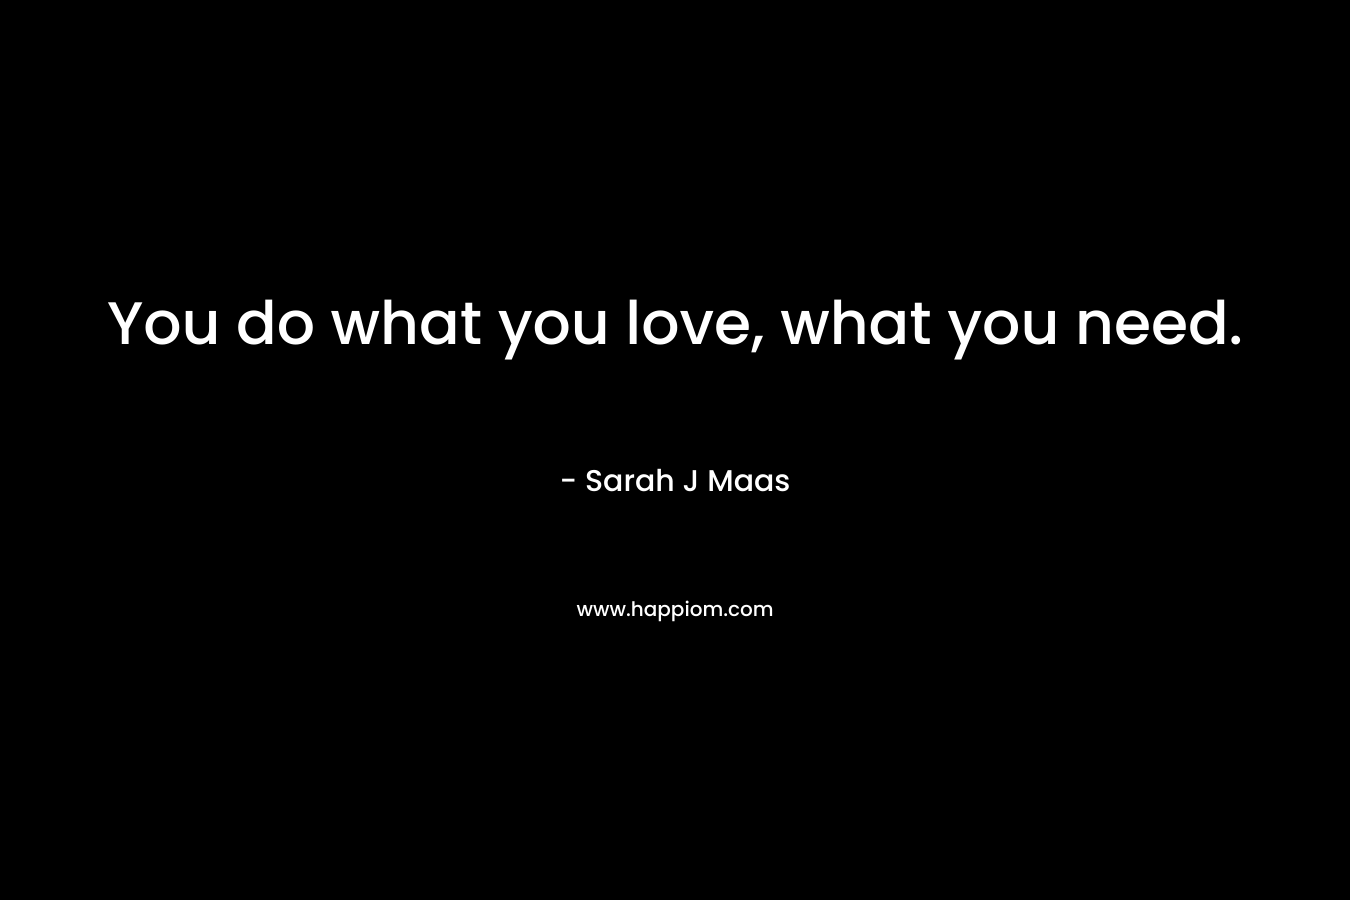 You do what you love, what you need.